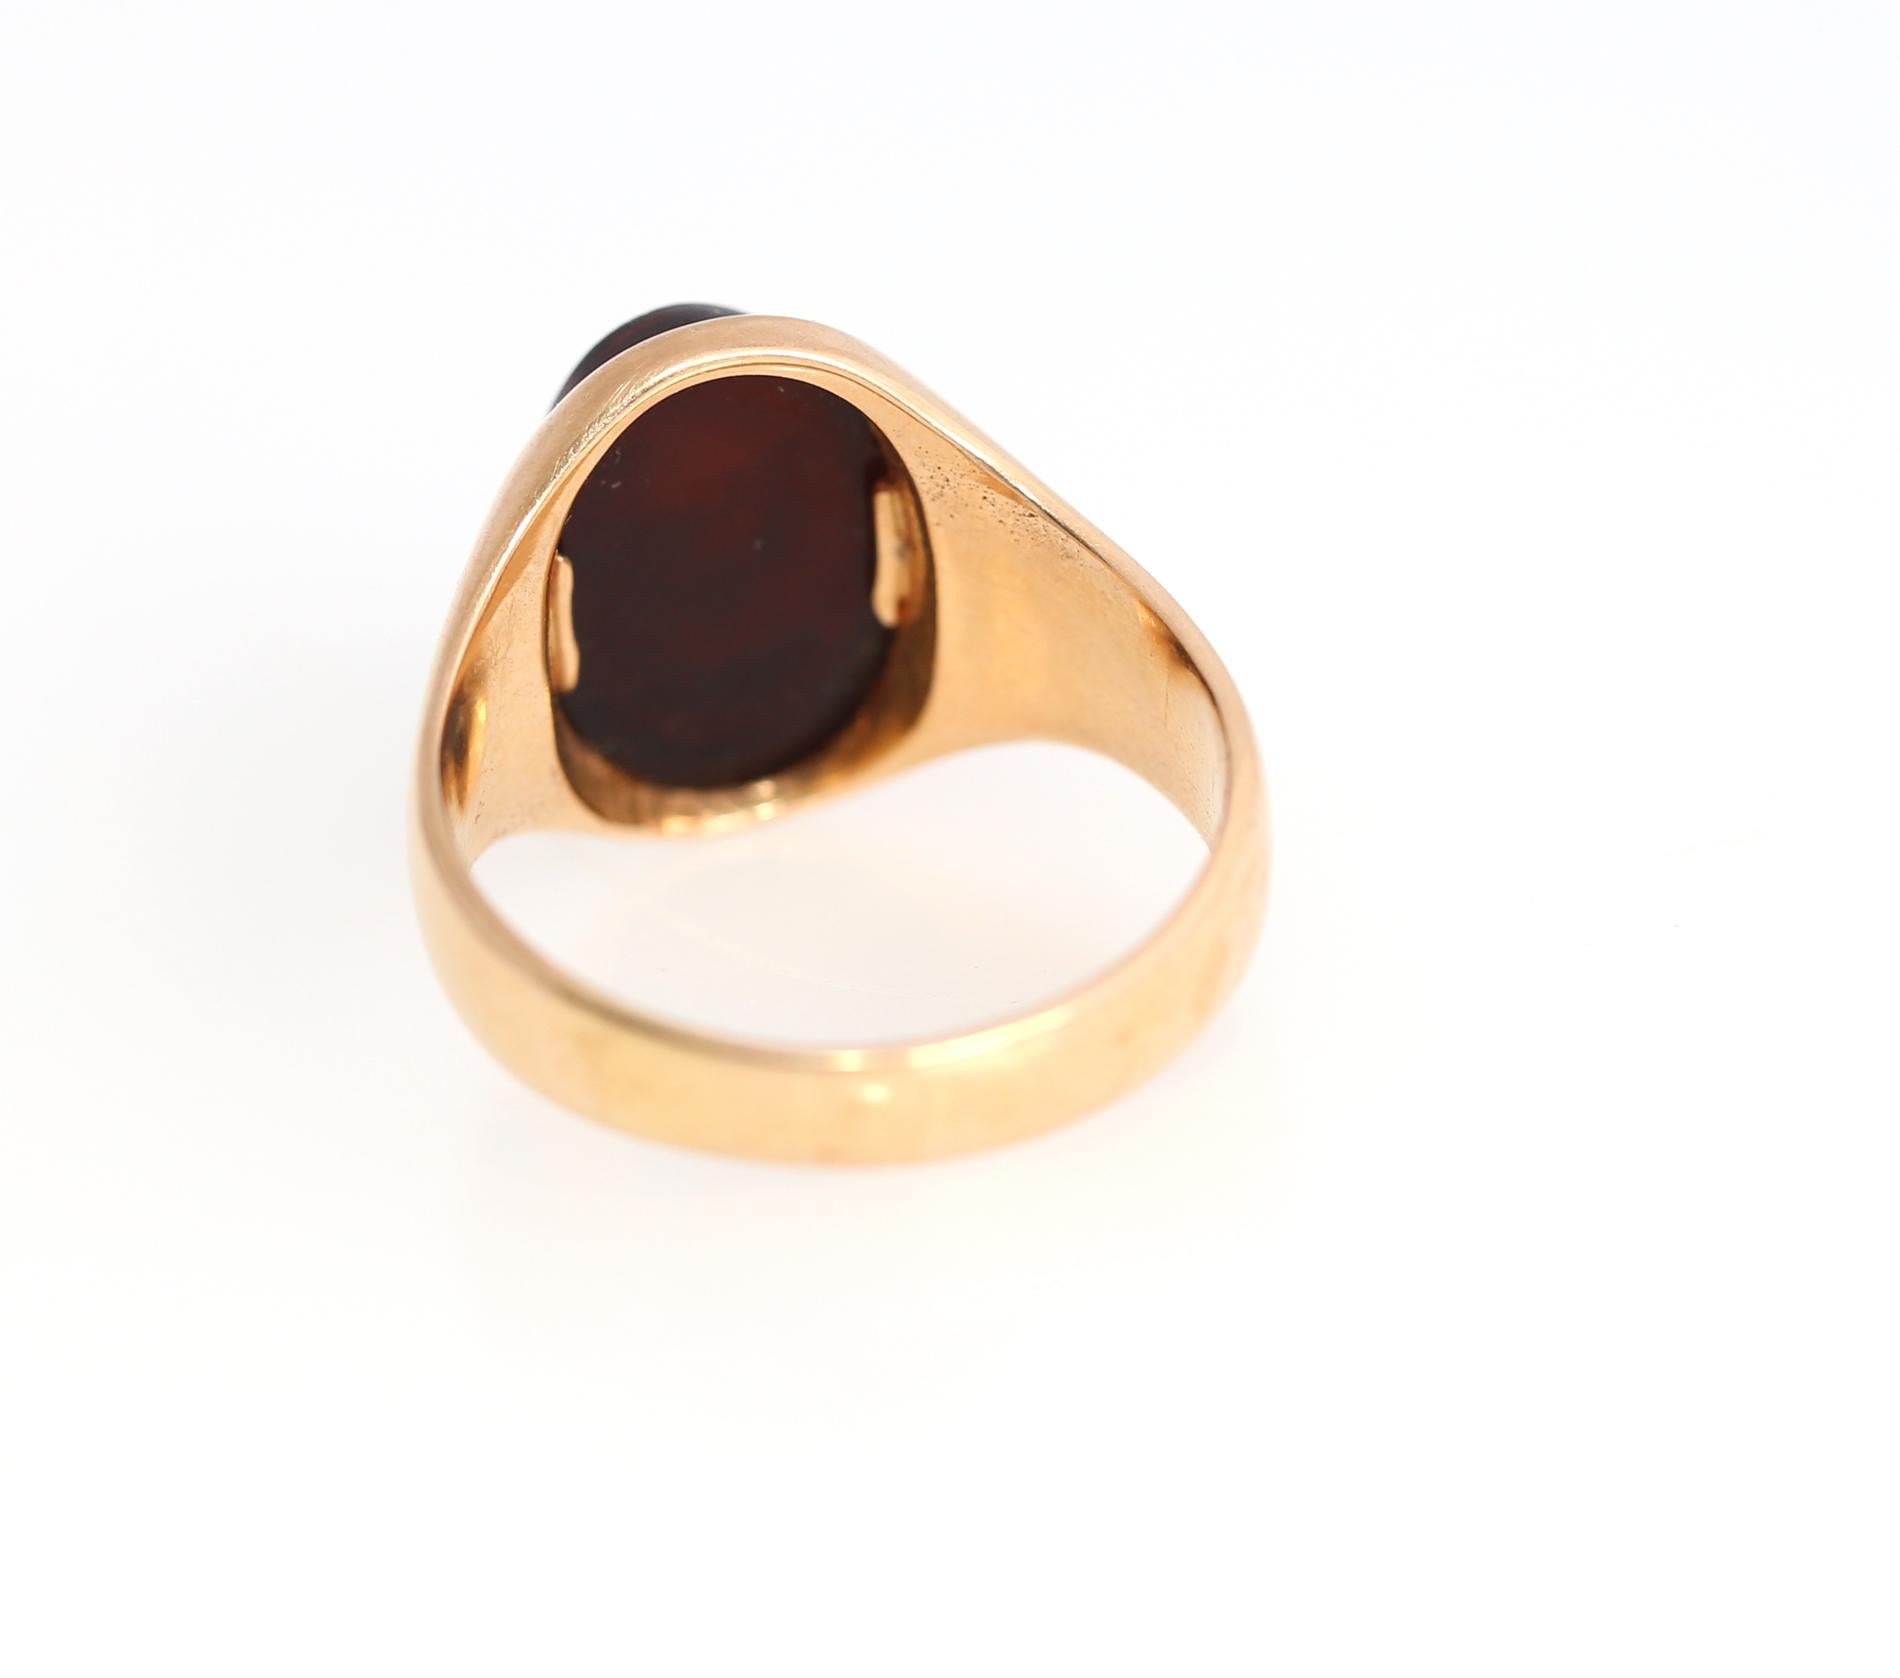 Oval Cut Signet Warrior Carved Red Onyx Gold Ring, 1920